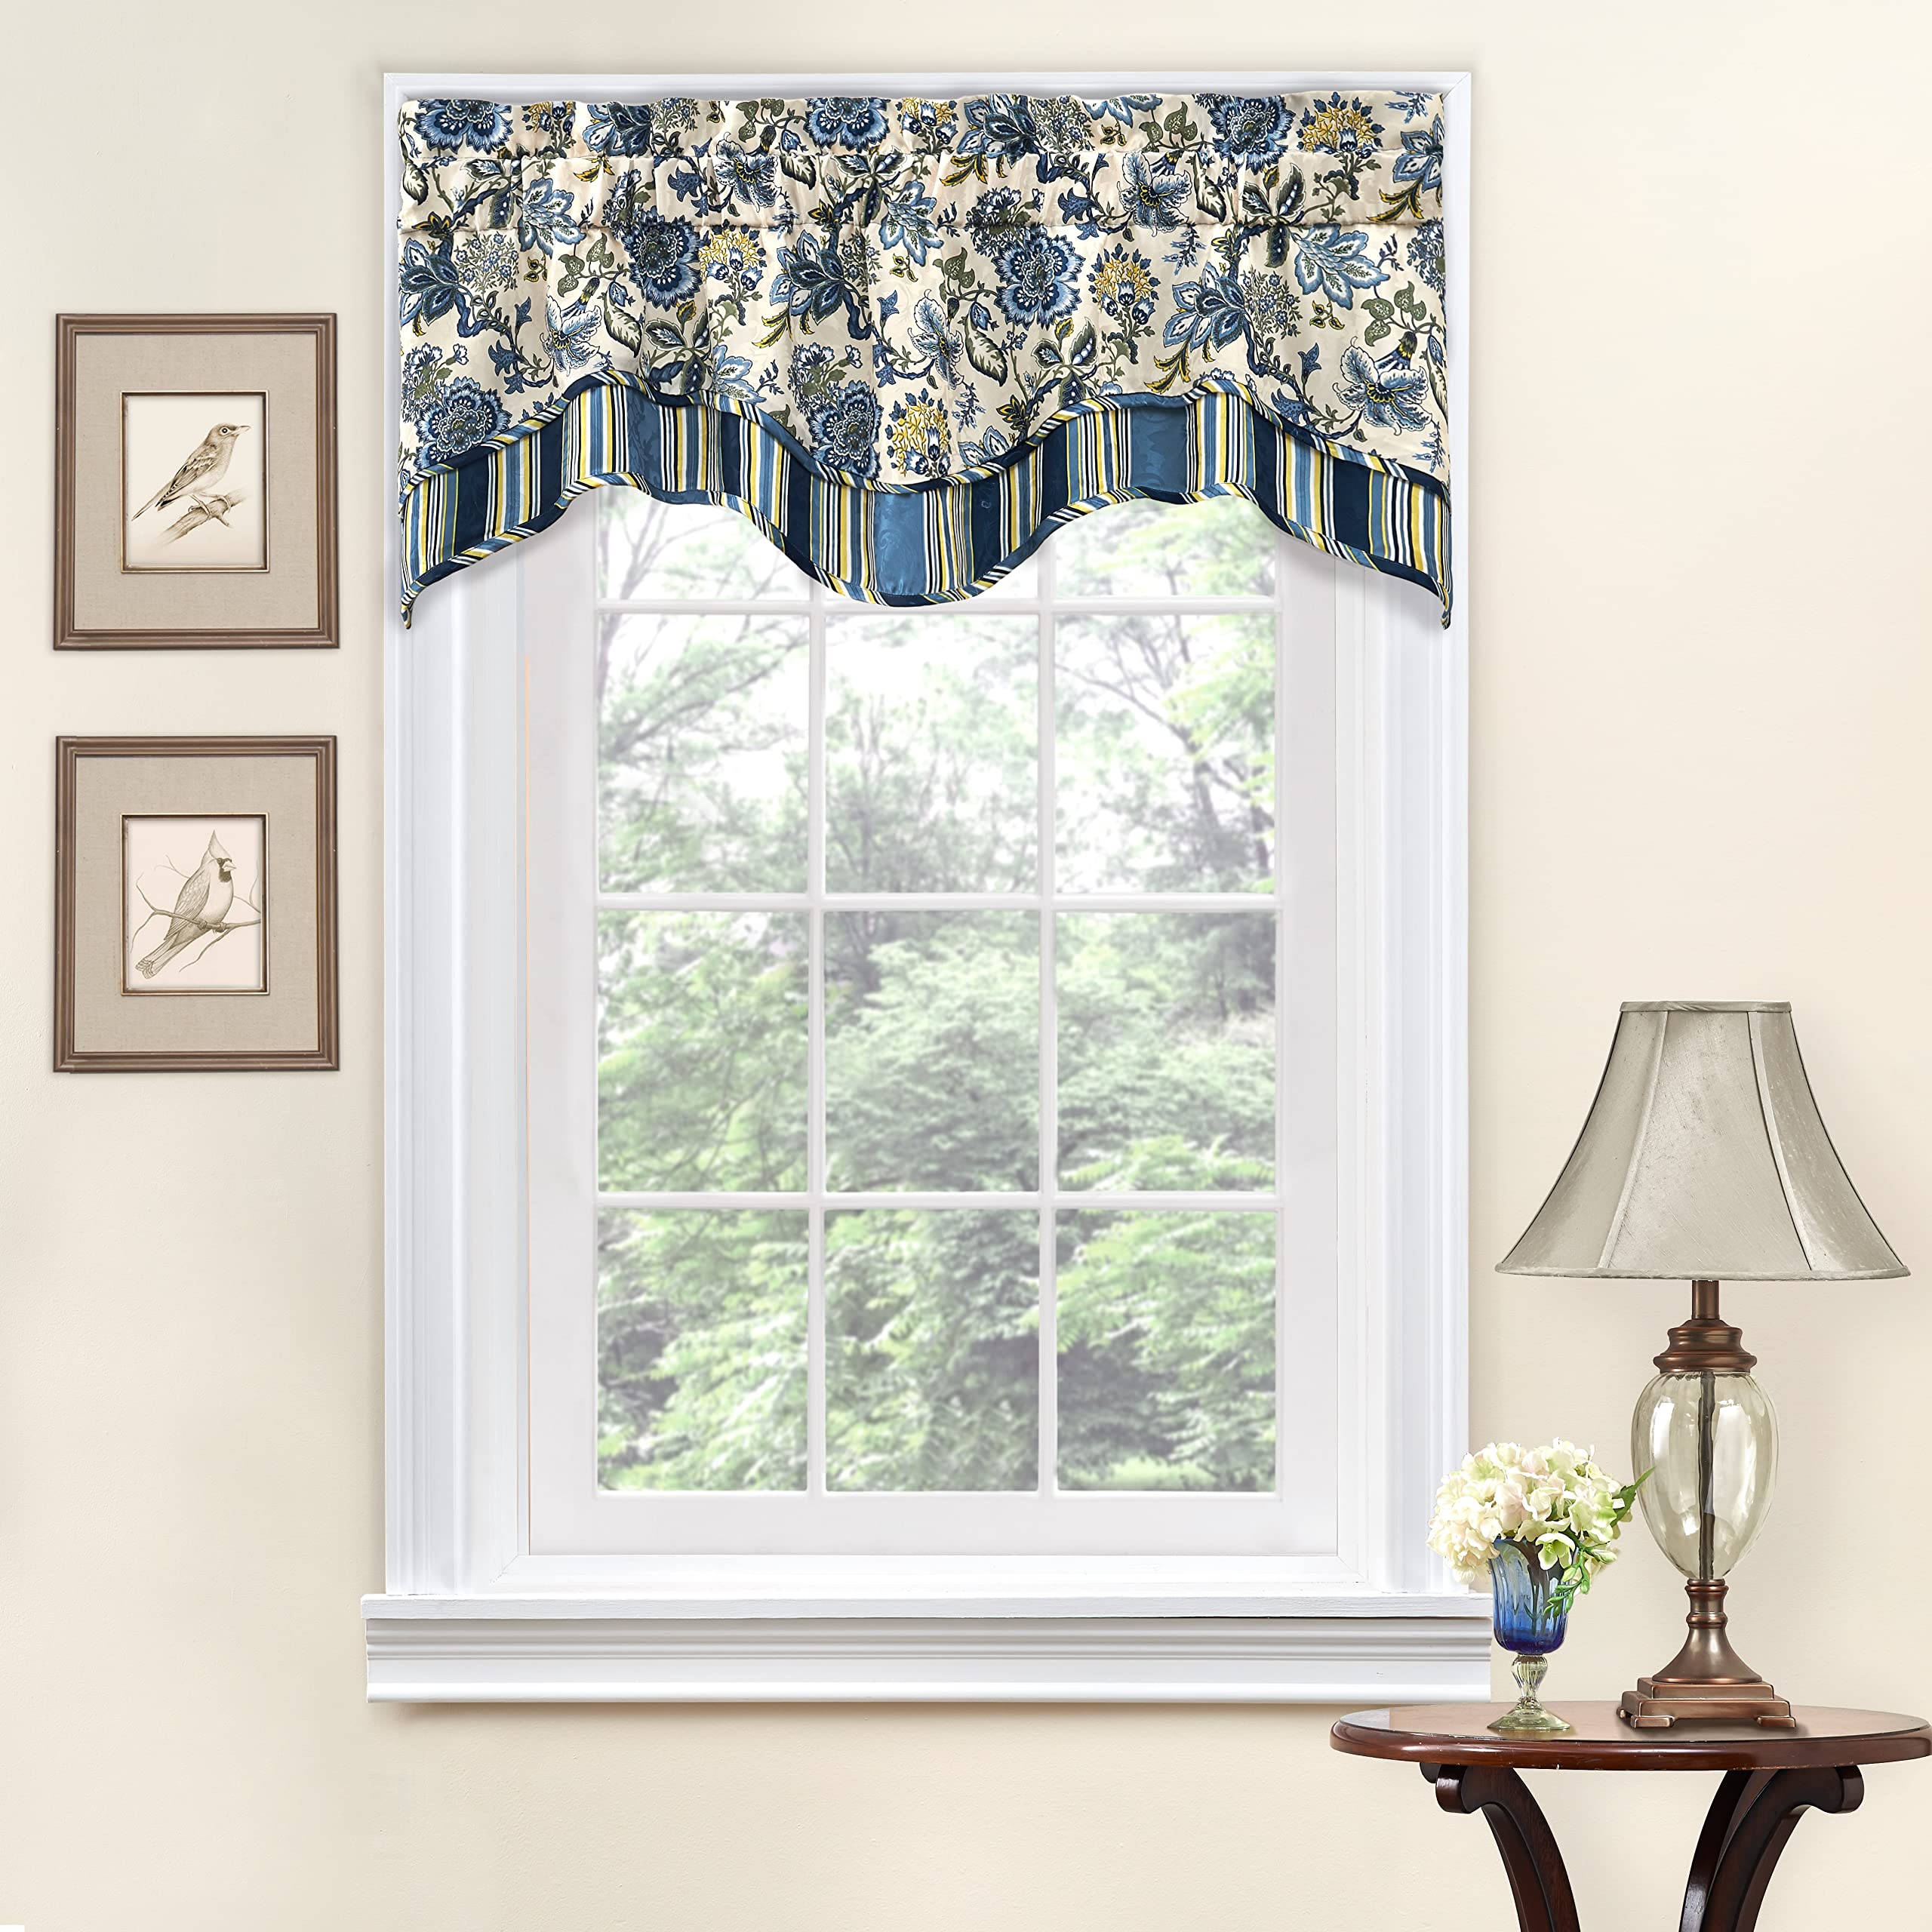 Waverly Navarra Farmhouse Scalloped Valance Rod Pocket Window Curtain for Kitchen or Bathroom, 52 in x 16 in, Porcelain